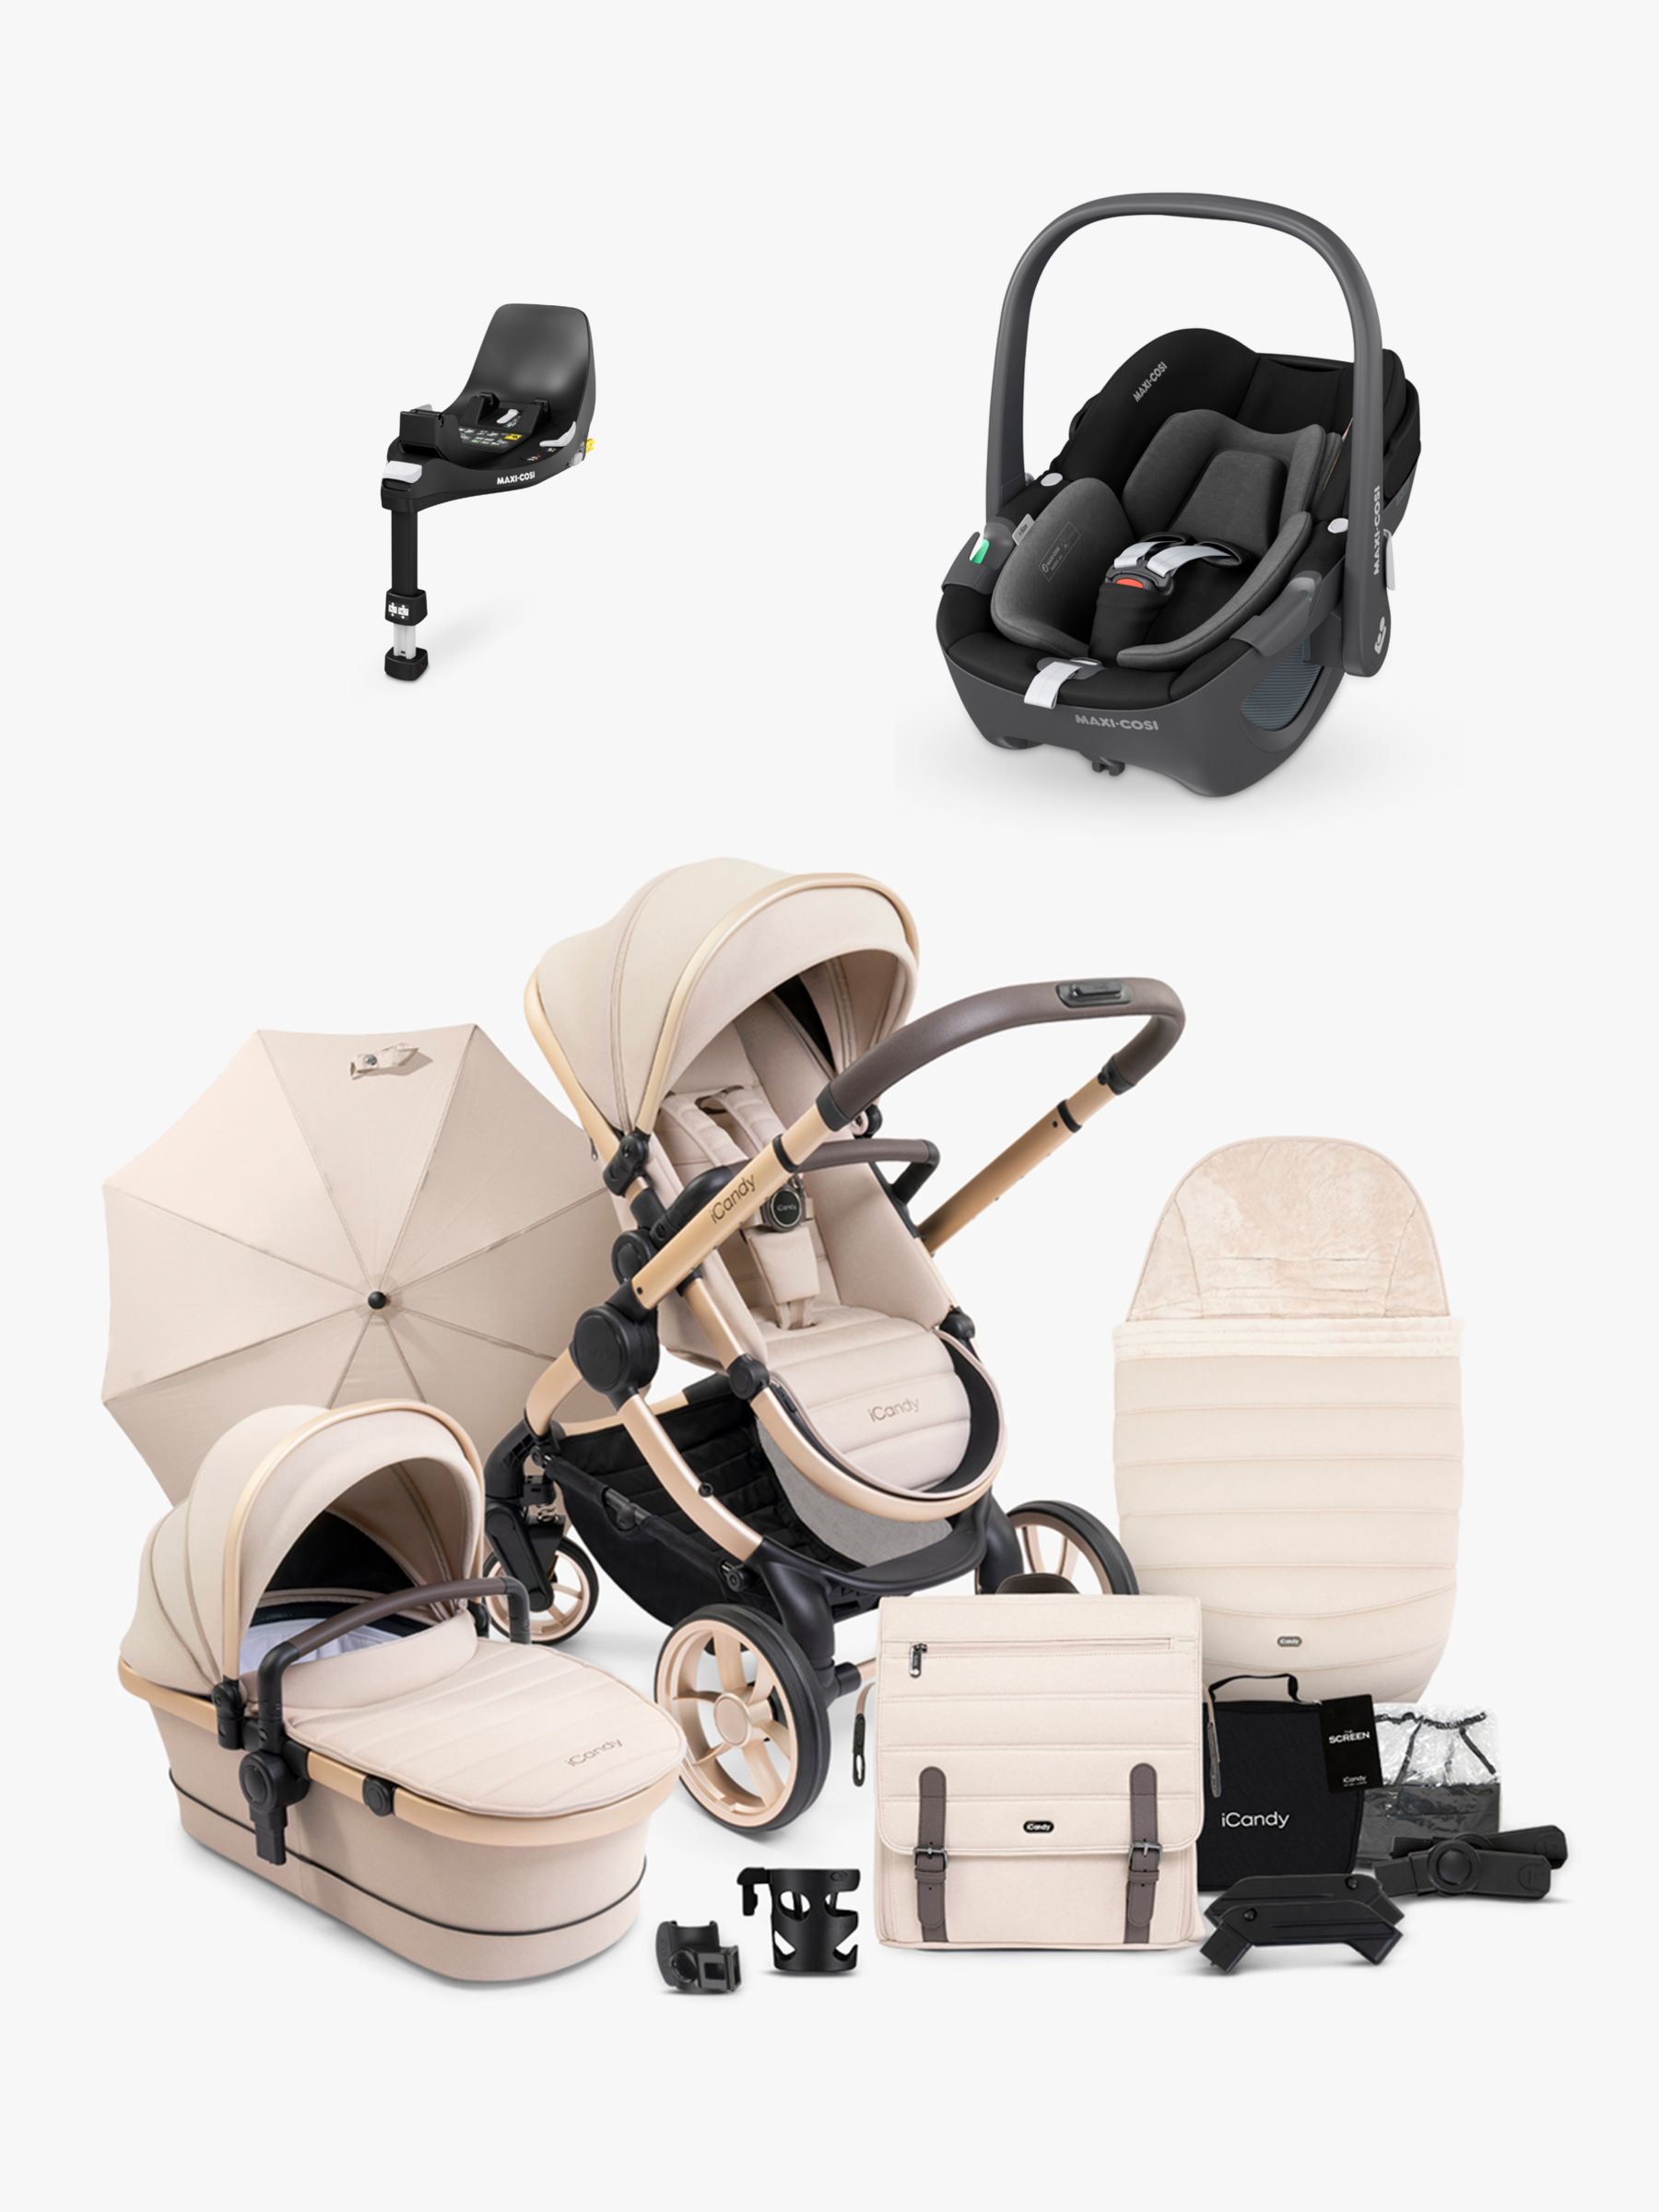 iCandy Peach 7 Pushchair & Accessories with Maxi-Cosi Pebble Baby Car Seat and Base Biscotti/Black